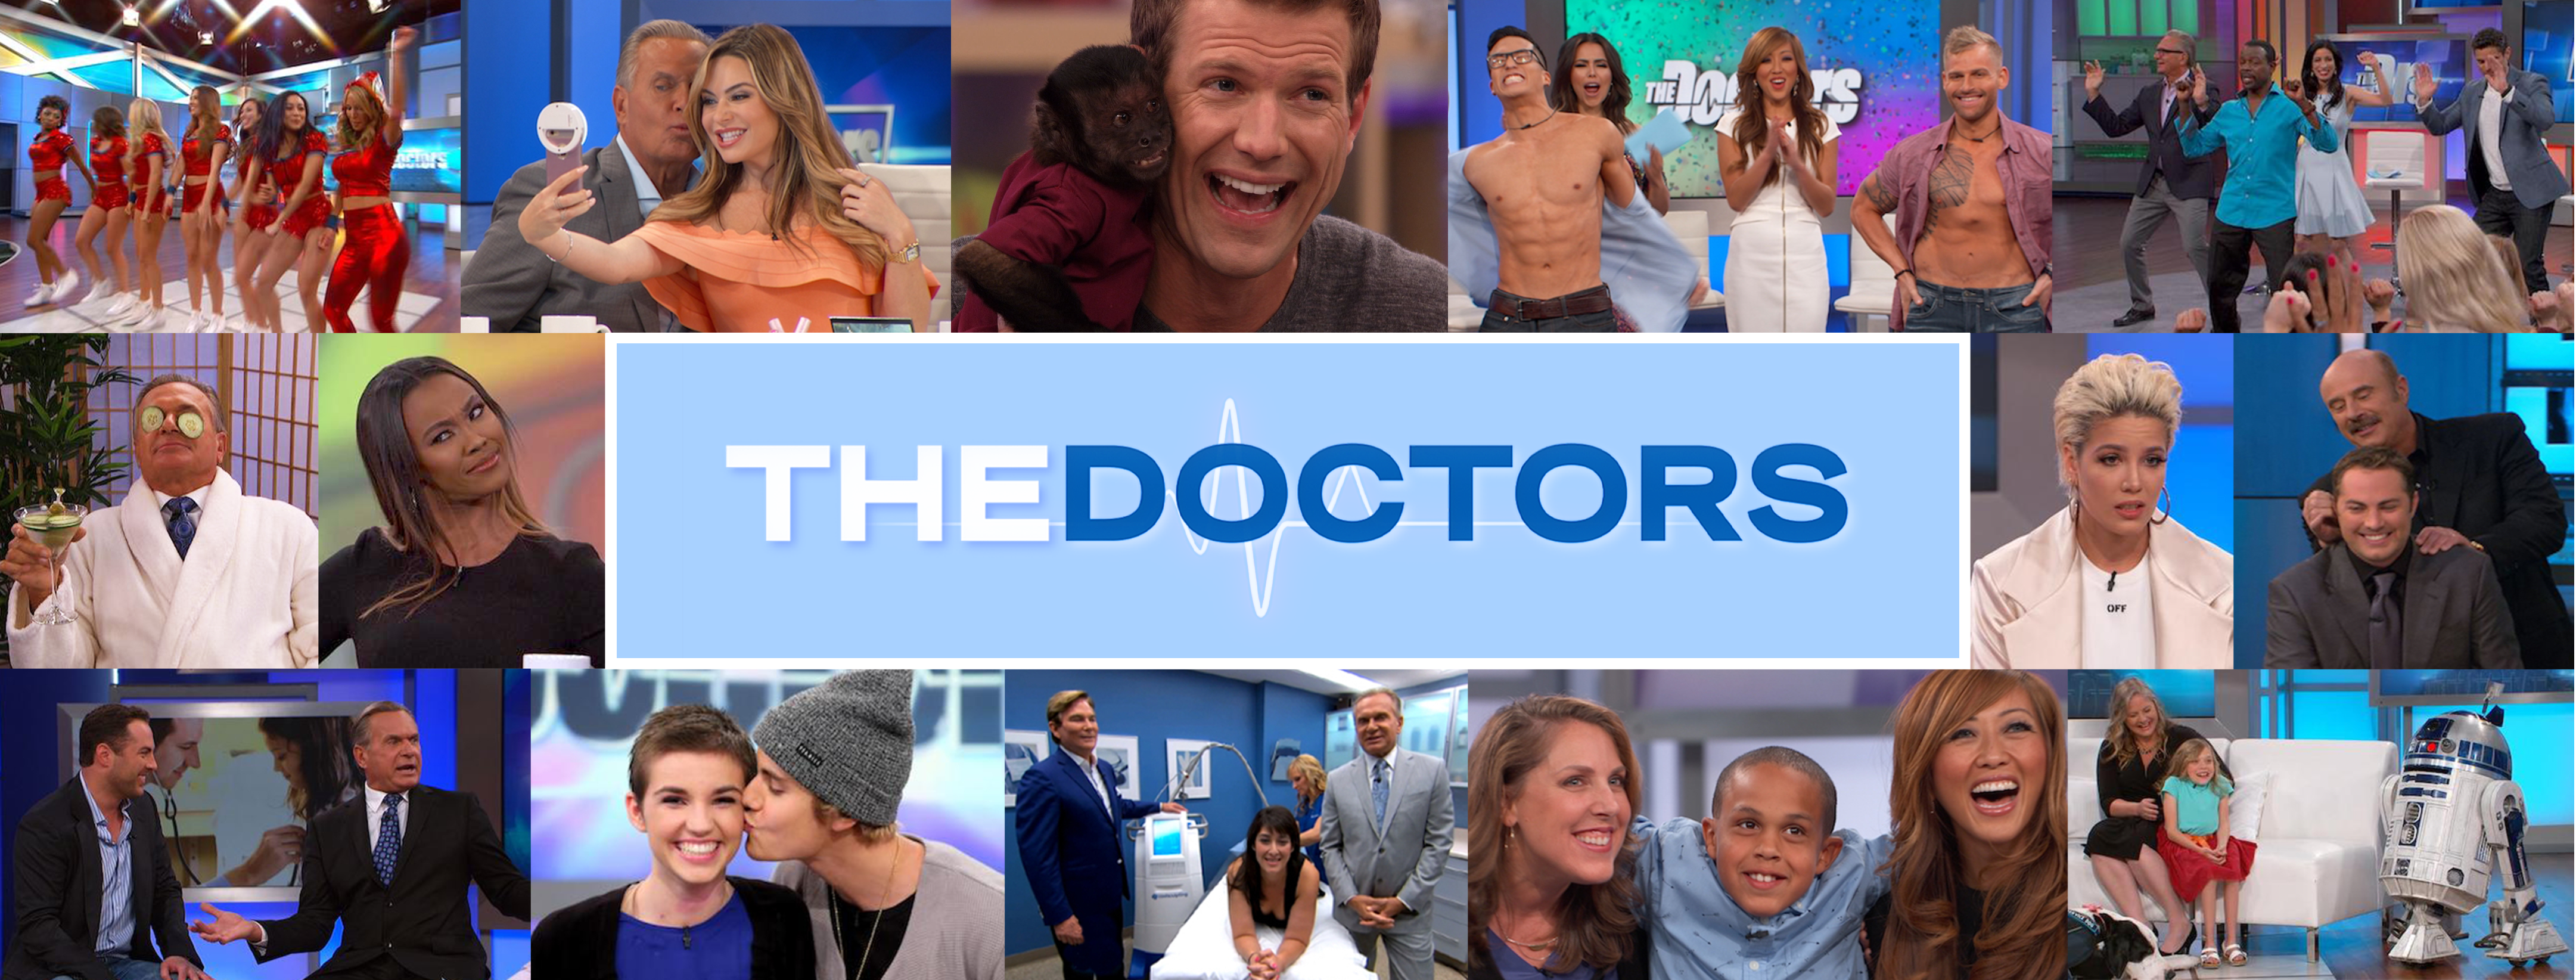 Man Claims He Has World's Largest Male Member | The Doctors TV Show